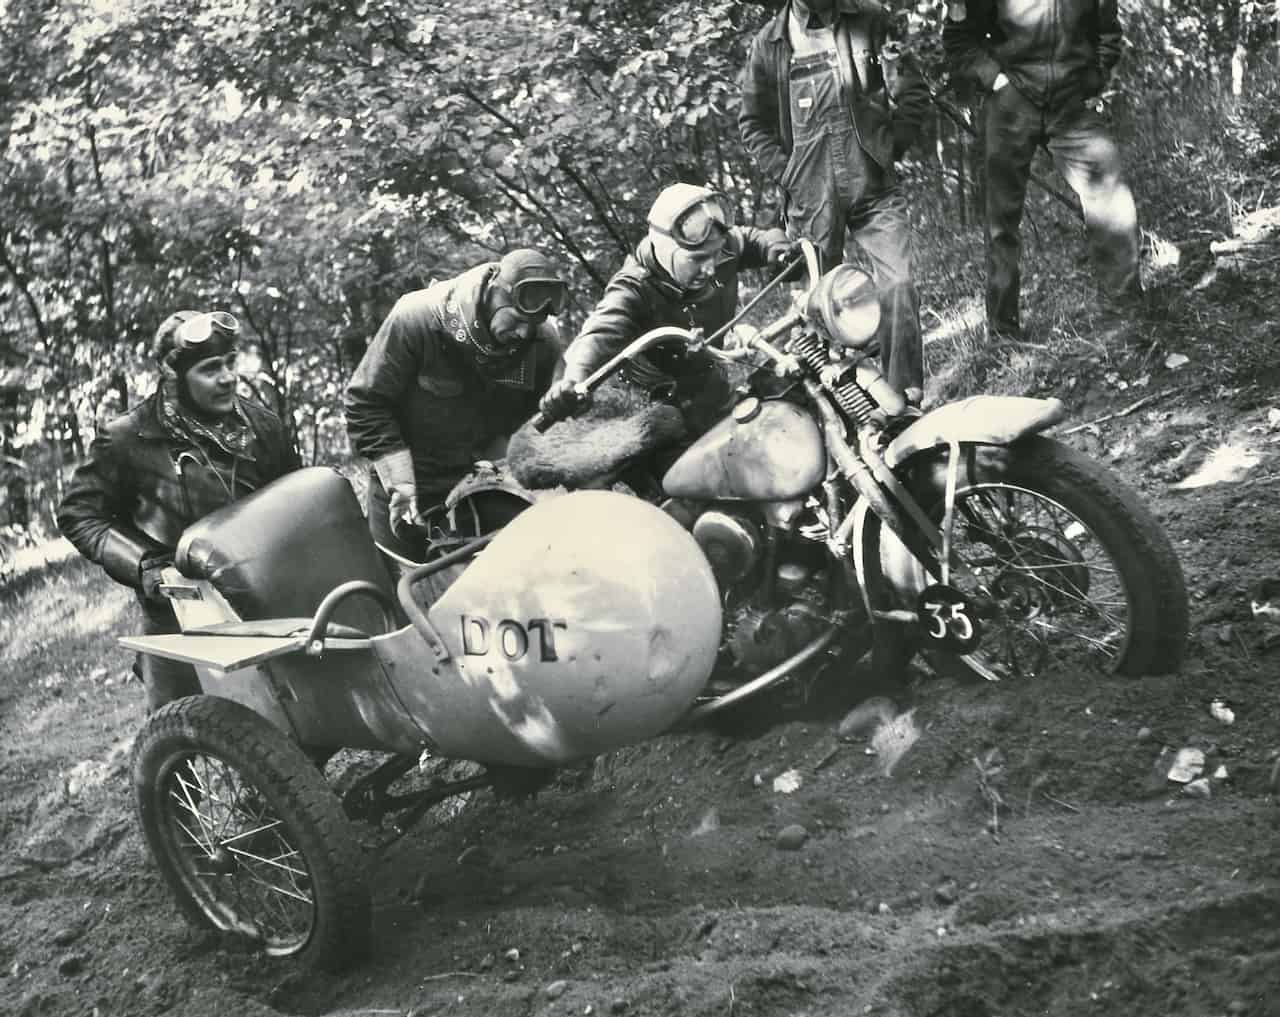 Harley museum explores motorcycle company's off-road history